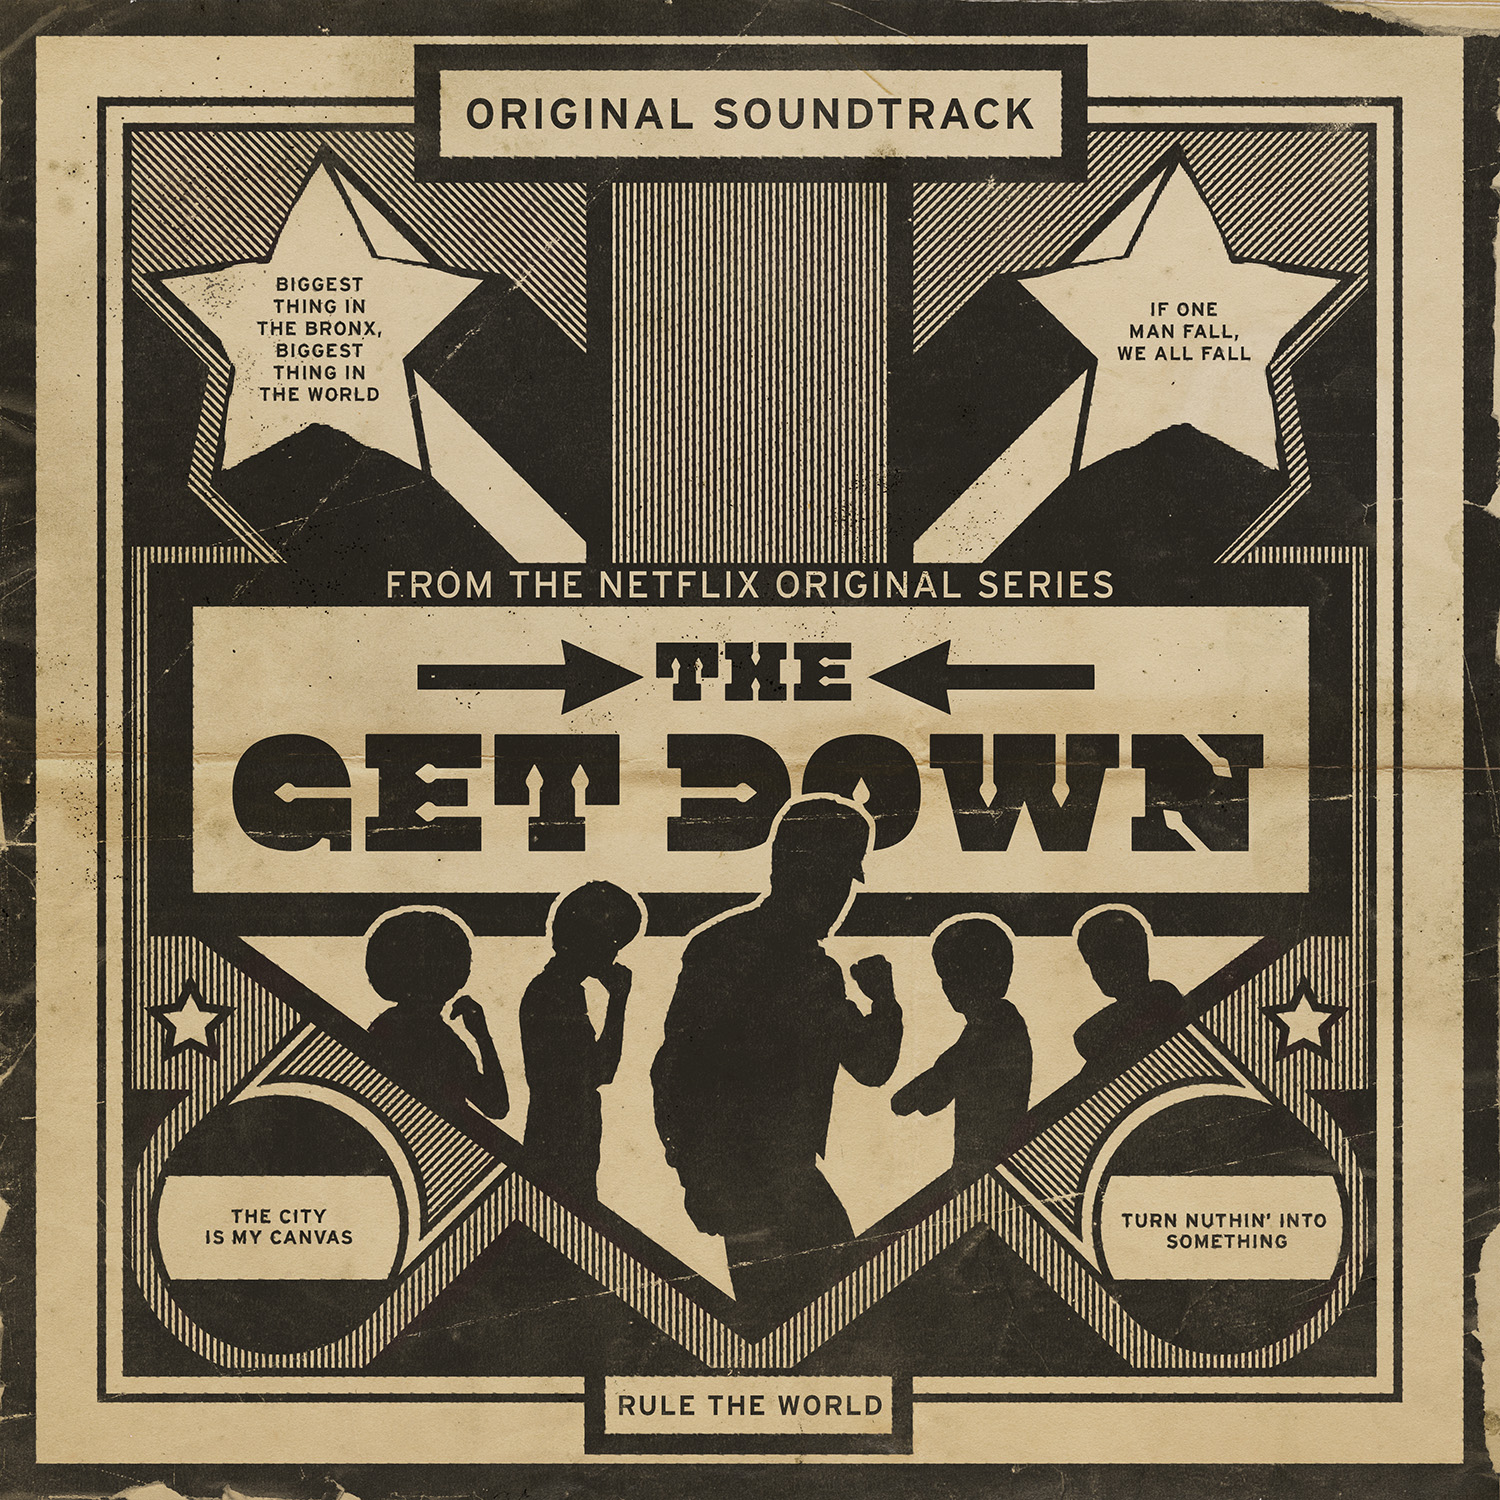 THE GET DOWN BSO